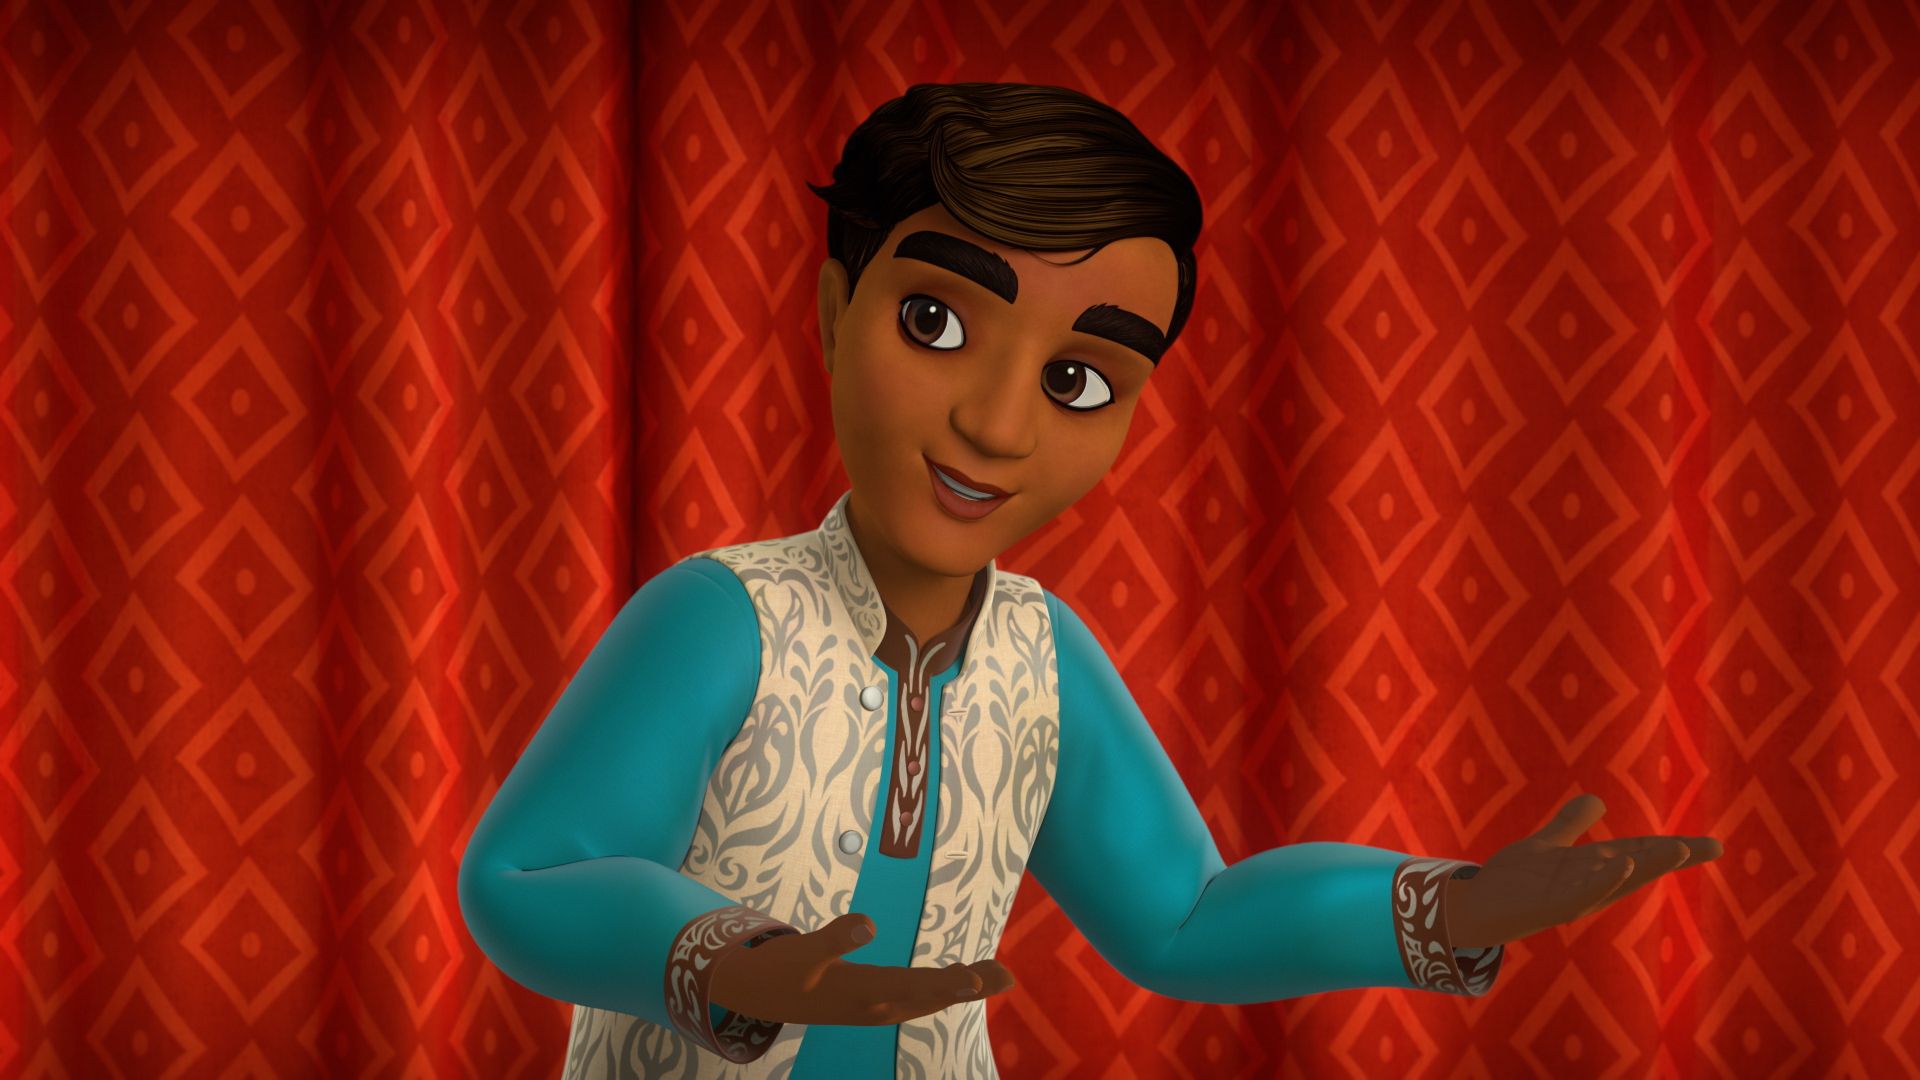 Exclusive first look at Danny Pudi's character in 'Mira, Royal Detective'